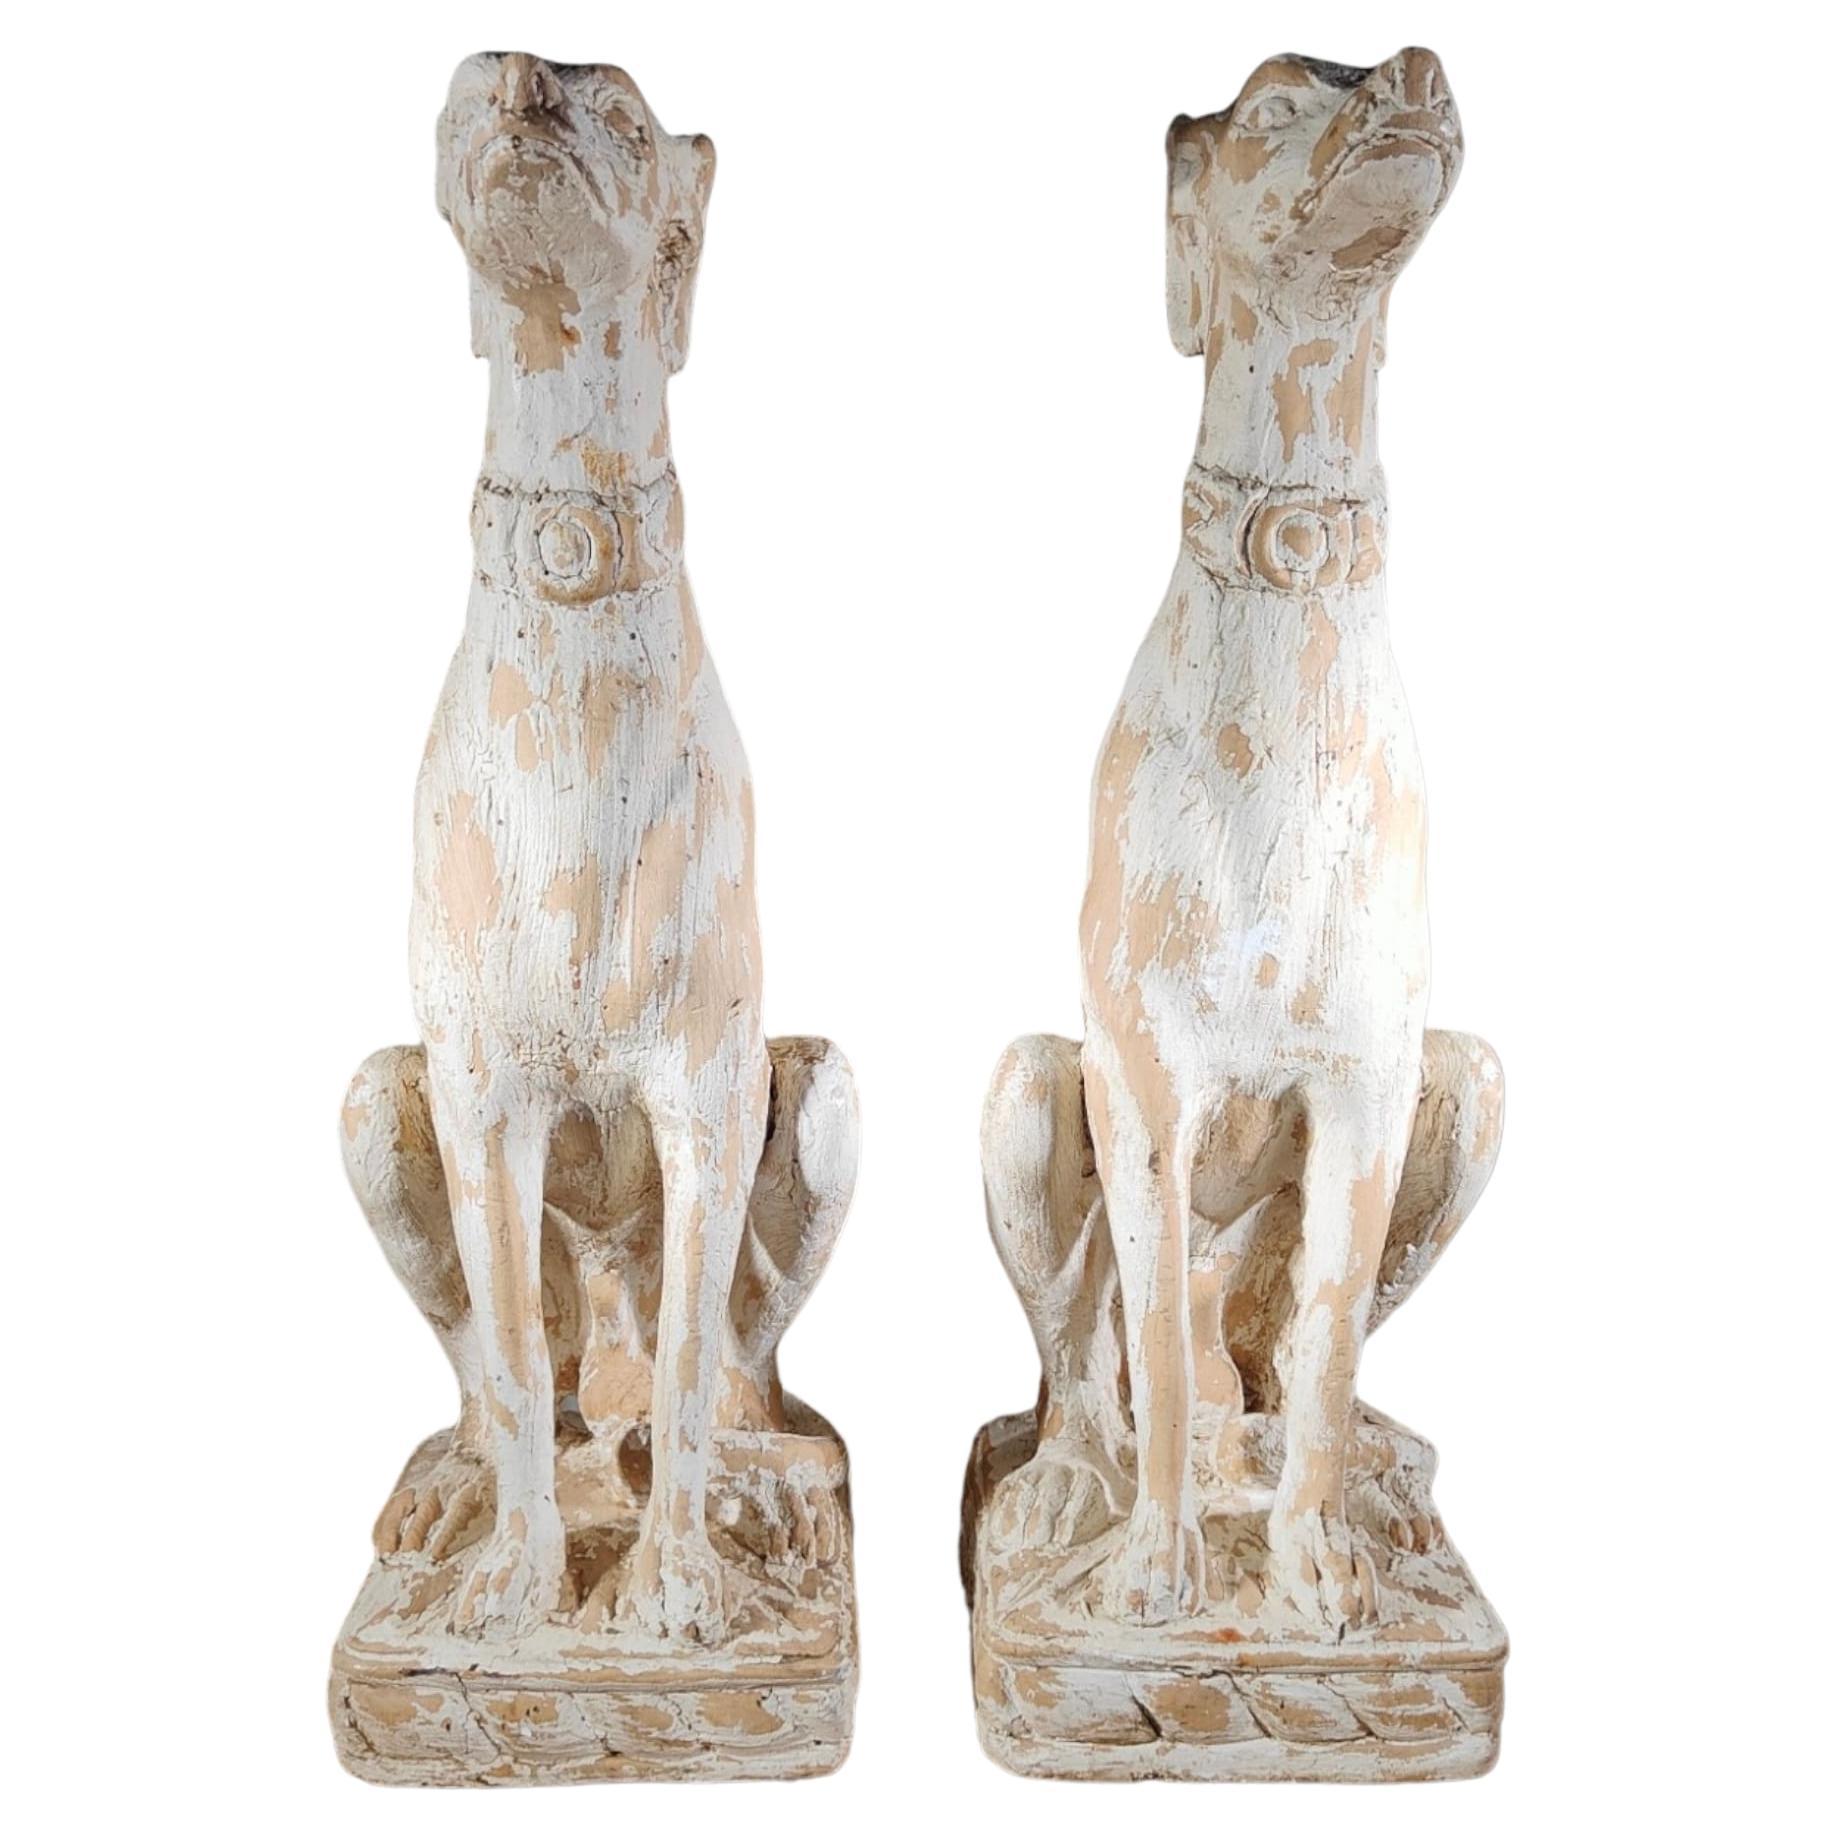 Charming Pair of Italian Greyhounds: Decorative Solid Wood Carved Statues For Sale